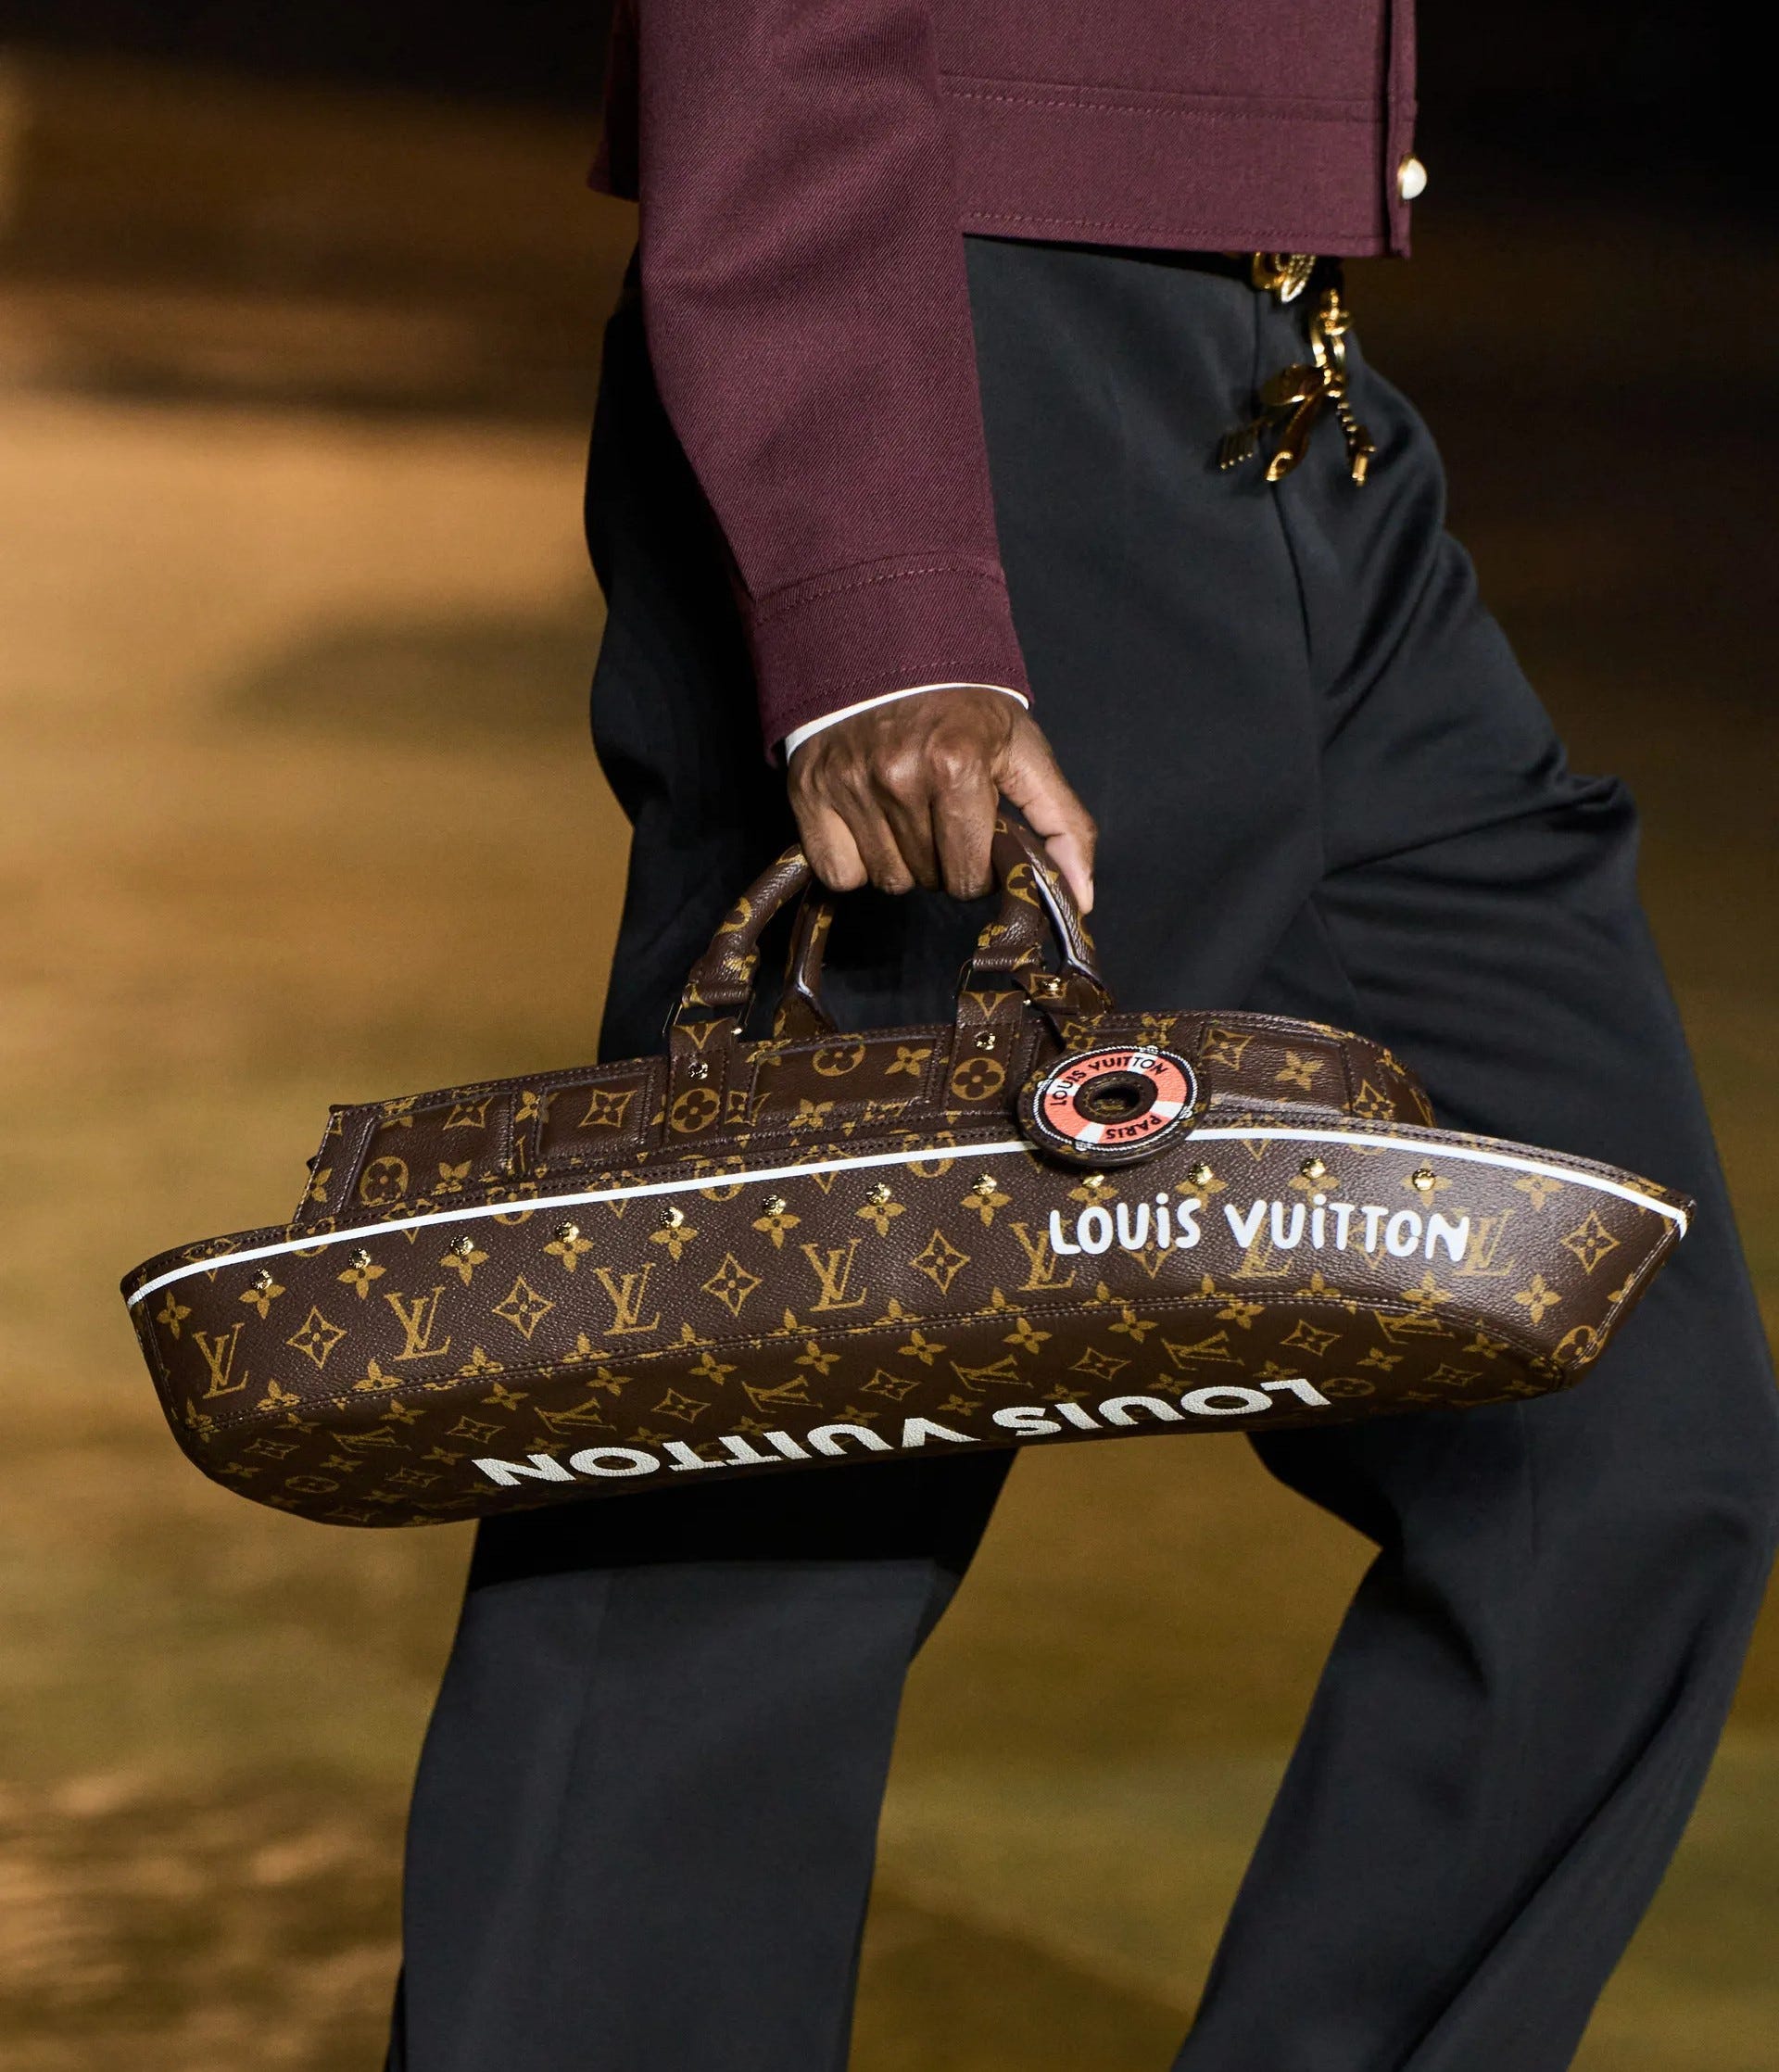 Let's get phygital! Louis Vuitton debuts a collection of Via